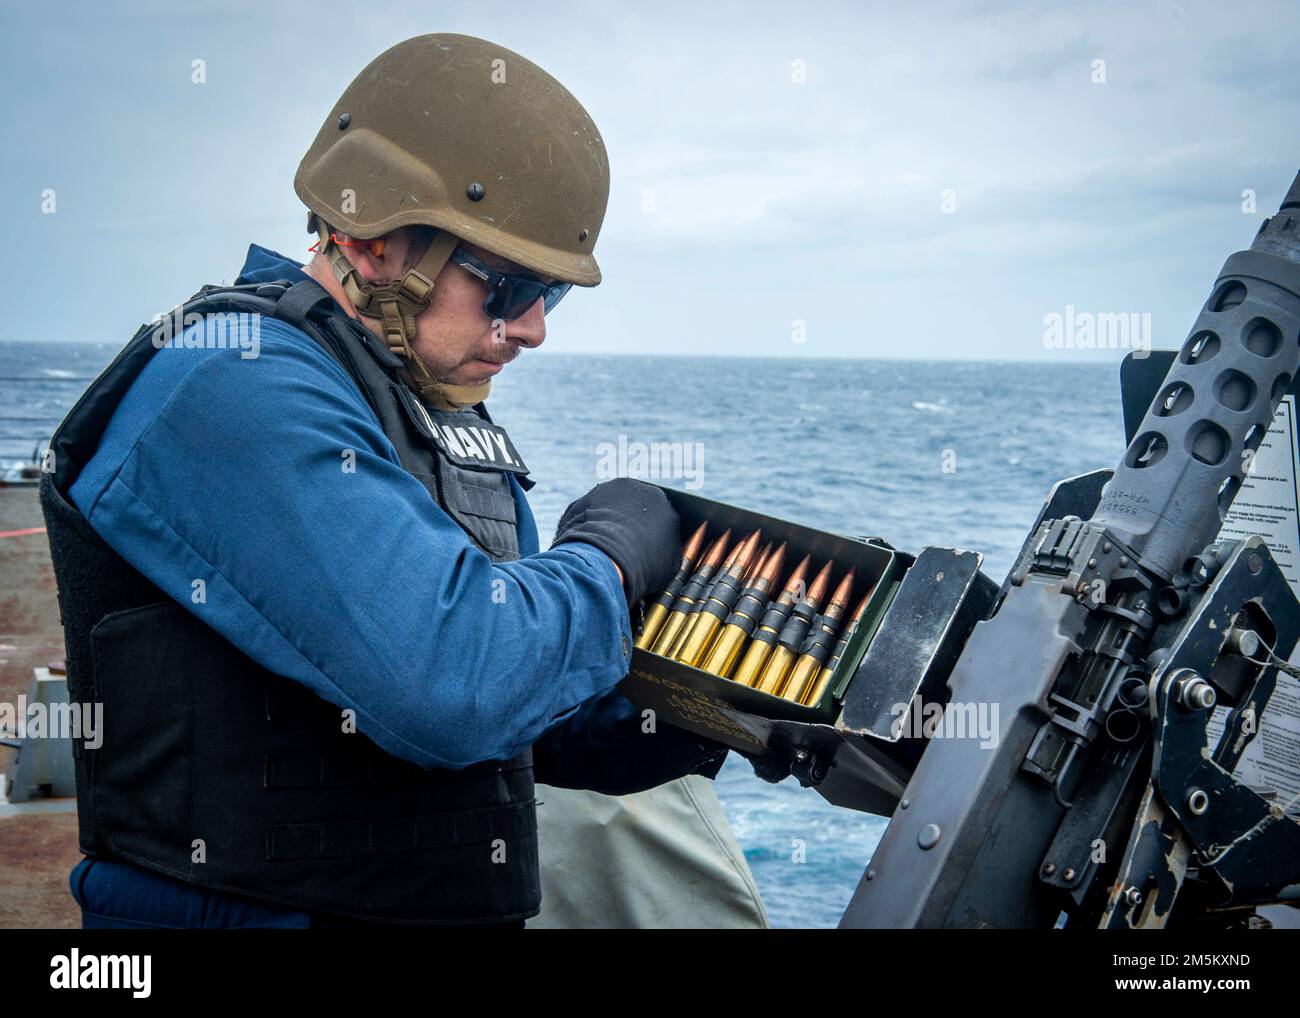 220323-N-FS190-1432 ATLANTIC OCEAN (March 23, 2022) Gunner's Mate 2nd Class David Diaz, assigned to the Arleigh Burke-class guided-missile destroyer USS Truxtun (DDG 103), loads rounds into a .50 caliber machine gun during a crew-served weapons shoot for Task Force Exercise (TFEX), March 23, 2022. TFEX is a scenario driven exercise that serves as certification for independent deploying ships and is designated to test mission readiness and performance in integrated operations. Truxtun is underway for Carrier Strike Group (CSG) 4 training evolutions. Stock Photo